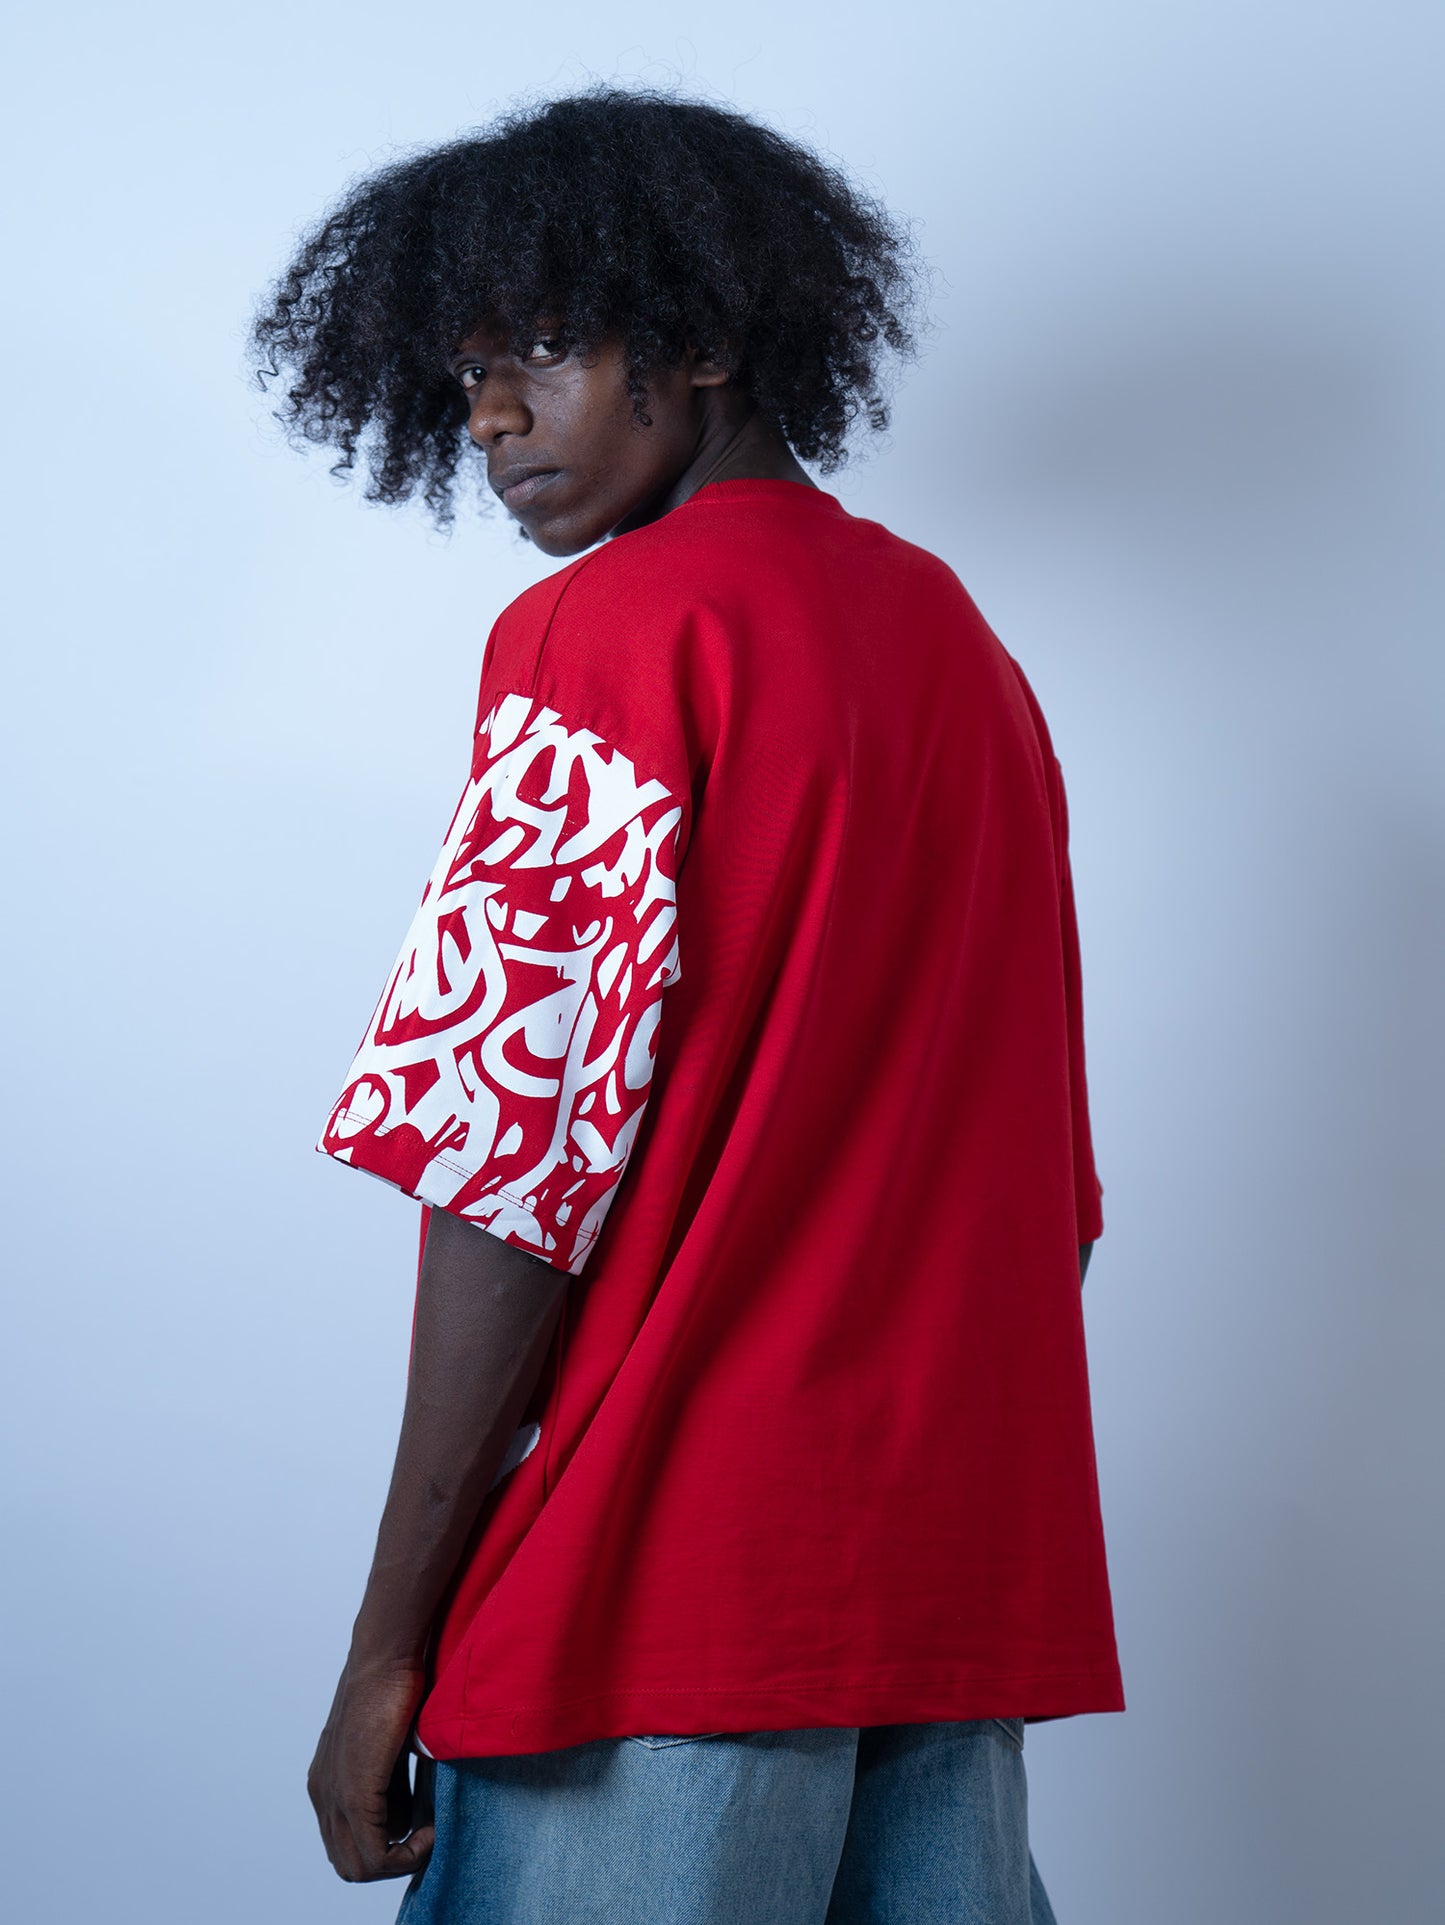 Rear view image of a guy wearing Red graffi tee from Ballucci.